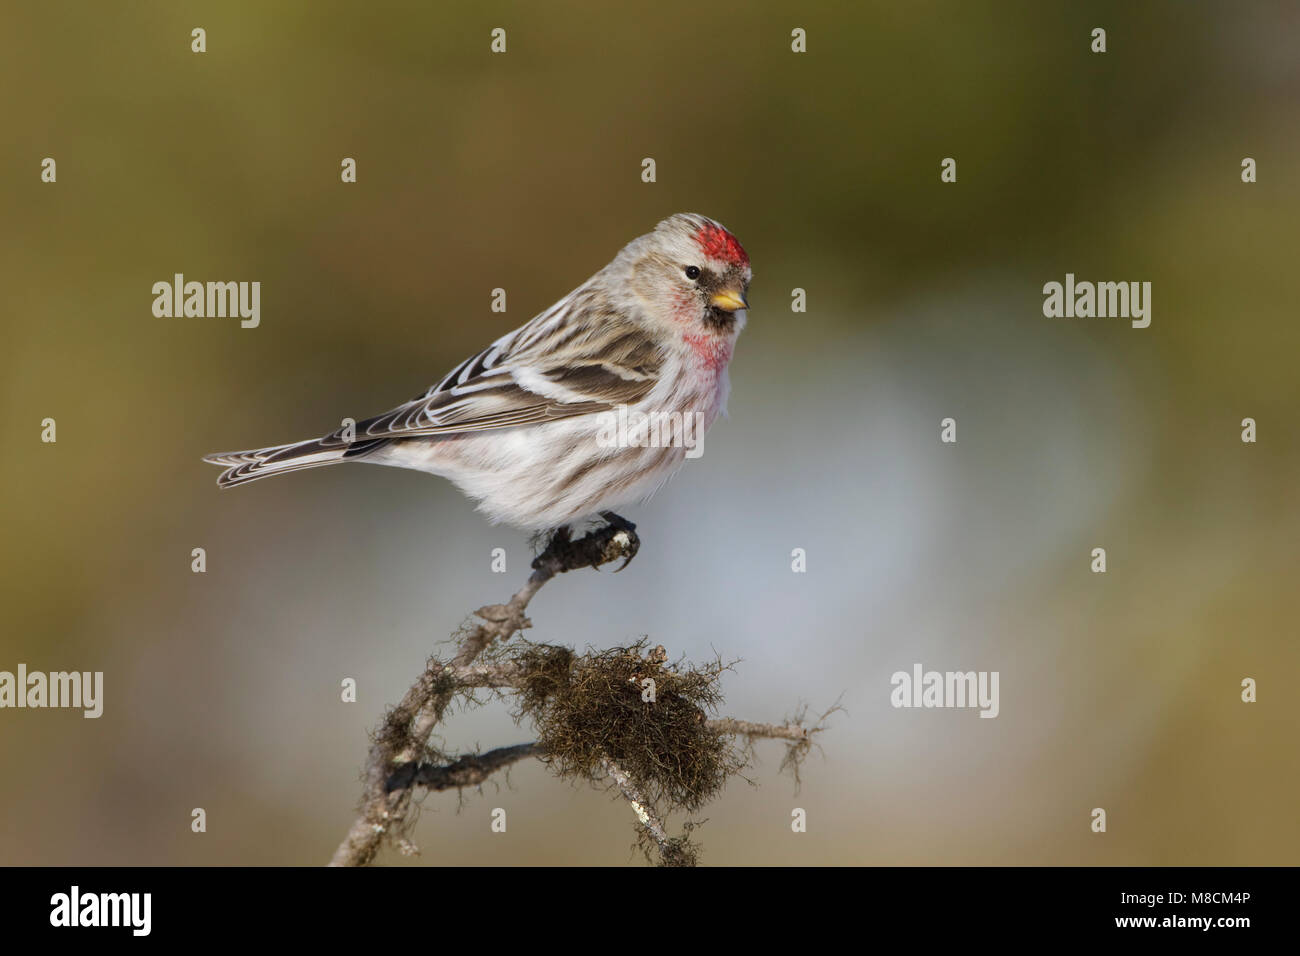 Grote Barmsijs zittend op tak; Mealy Redpoll perched on branch Stock Photo